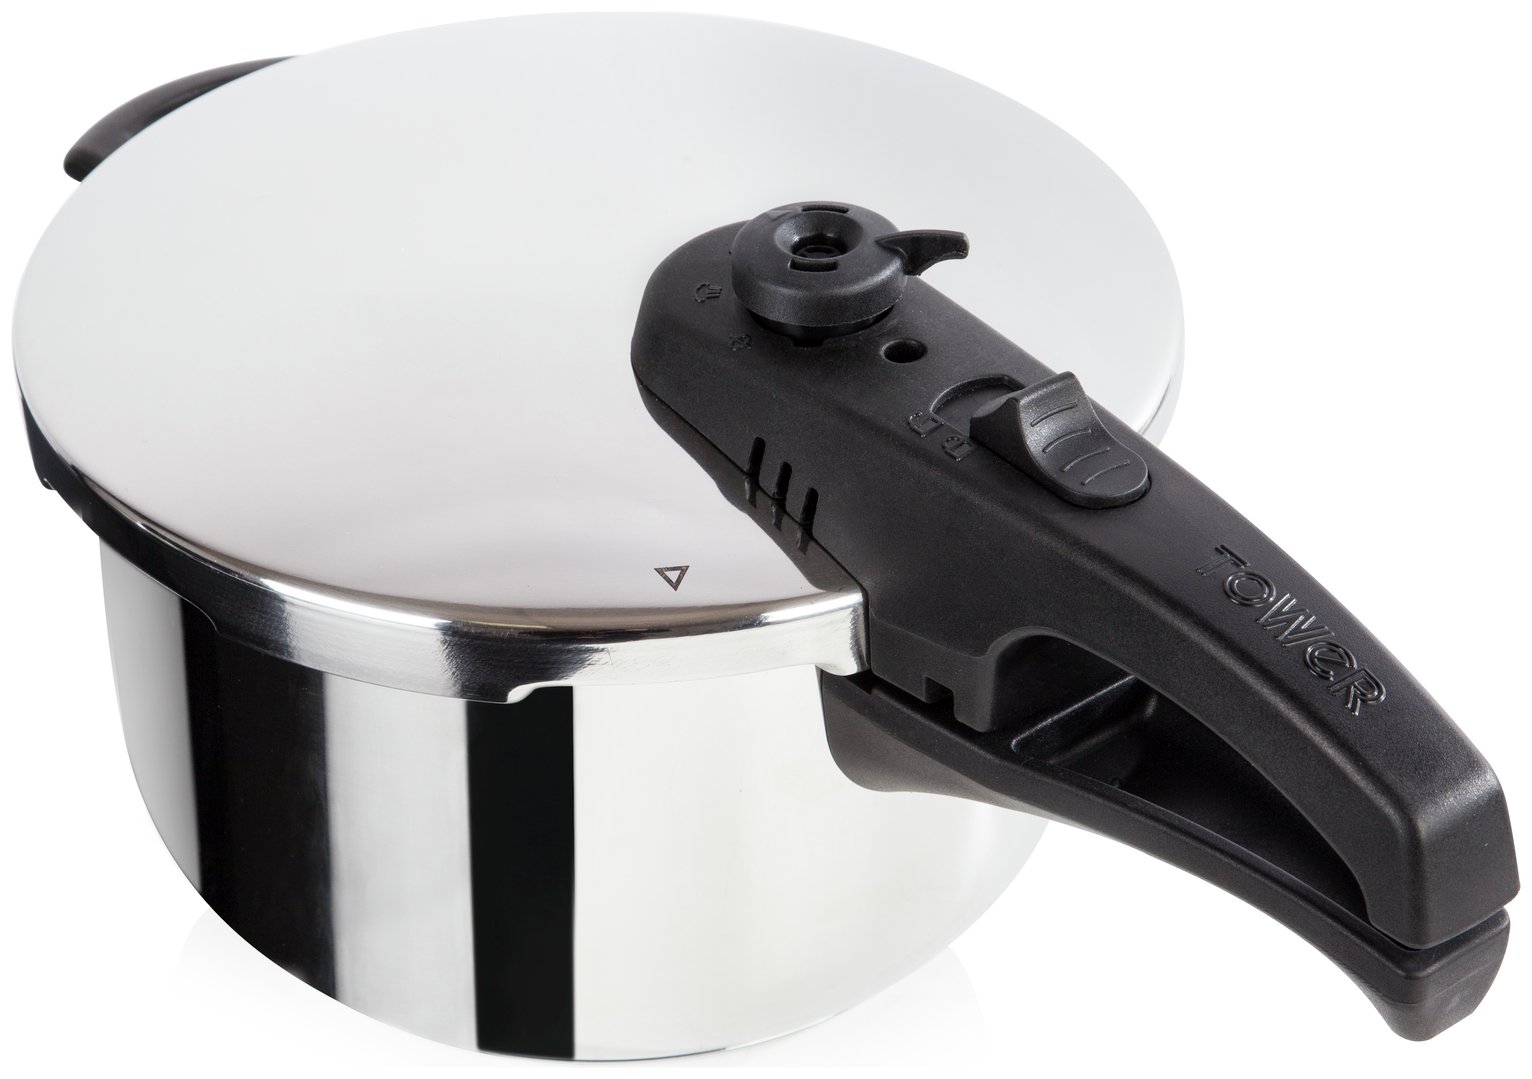 Tower 3 Litre Stainless Steel Pressure Cooker